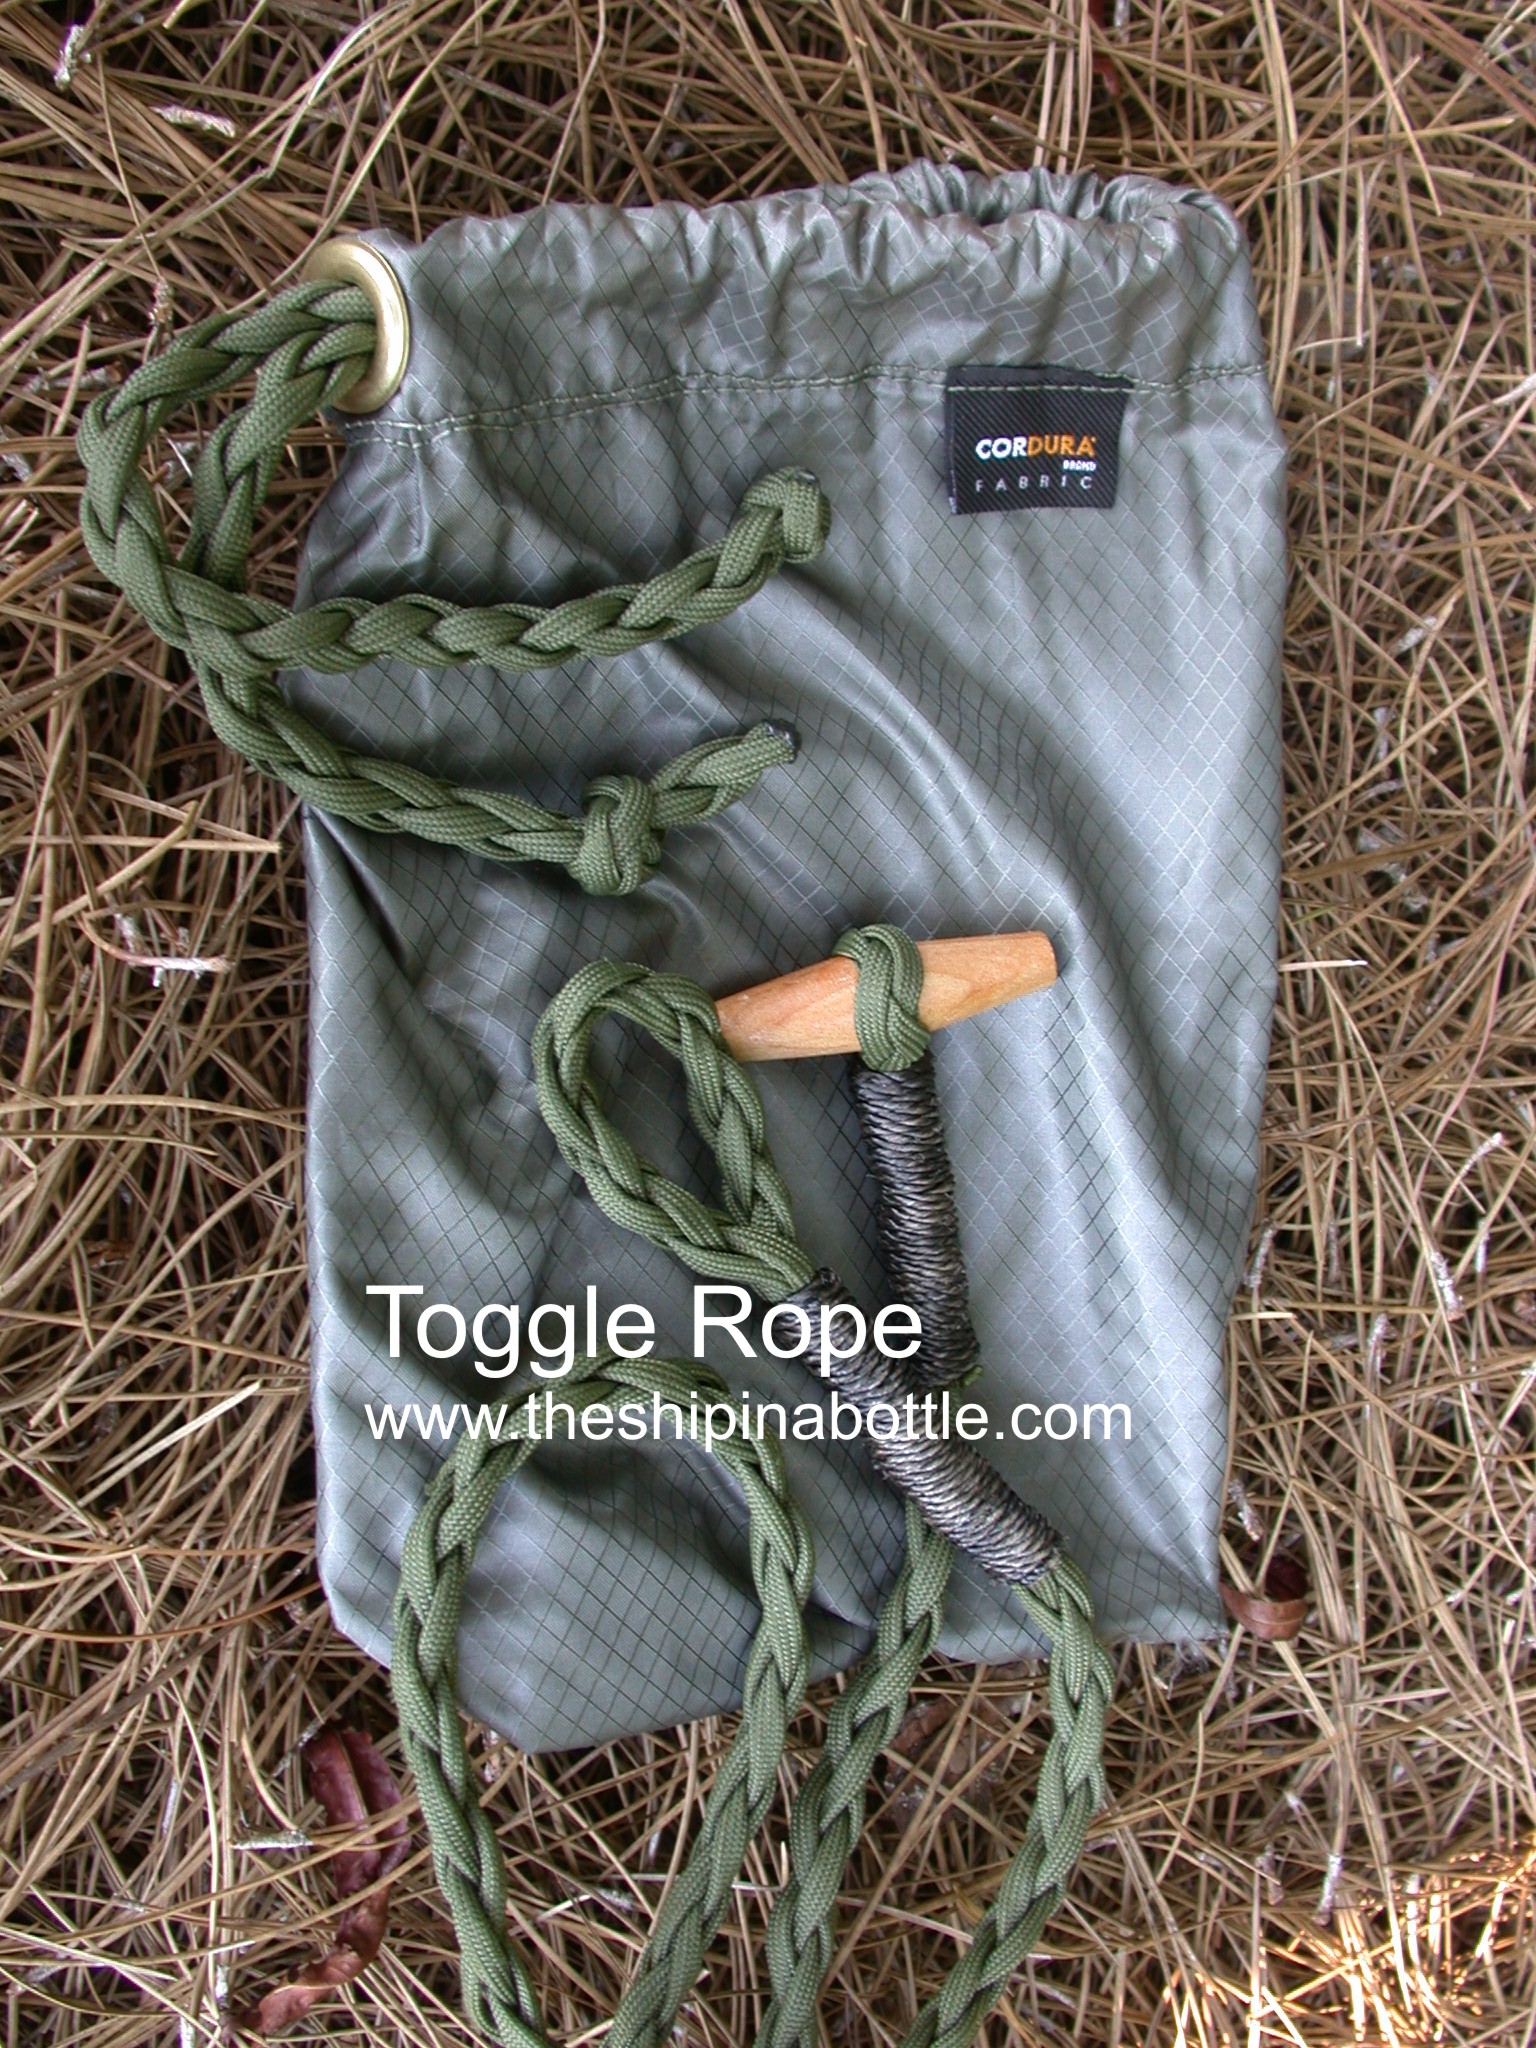 Our own very unique Toggle Rope